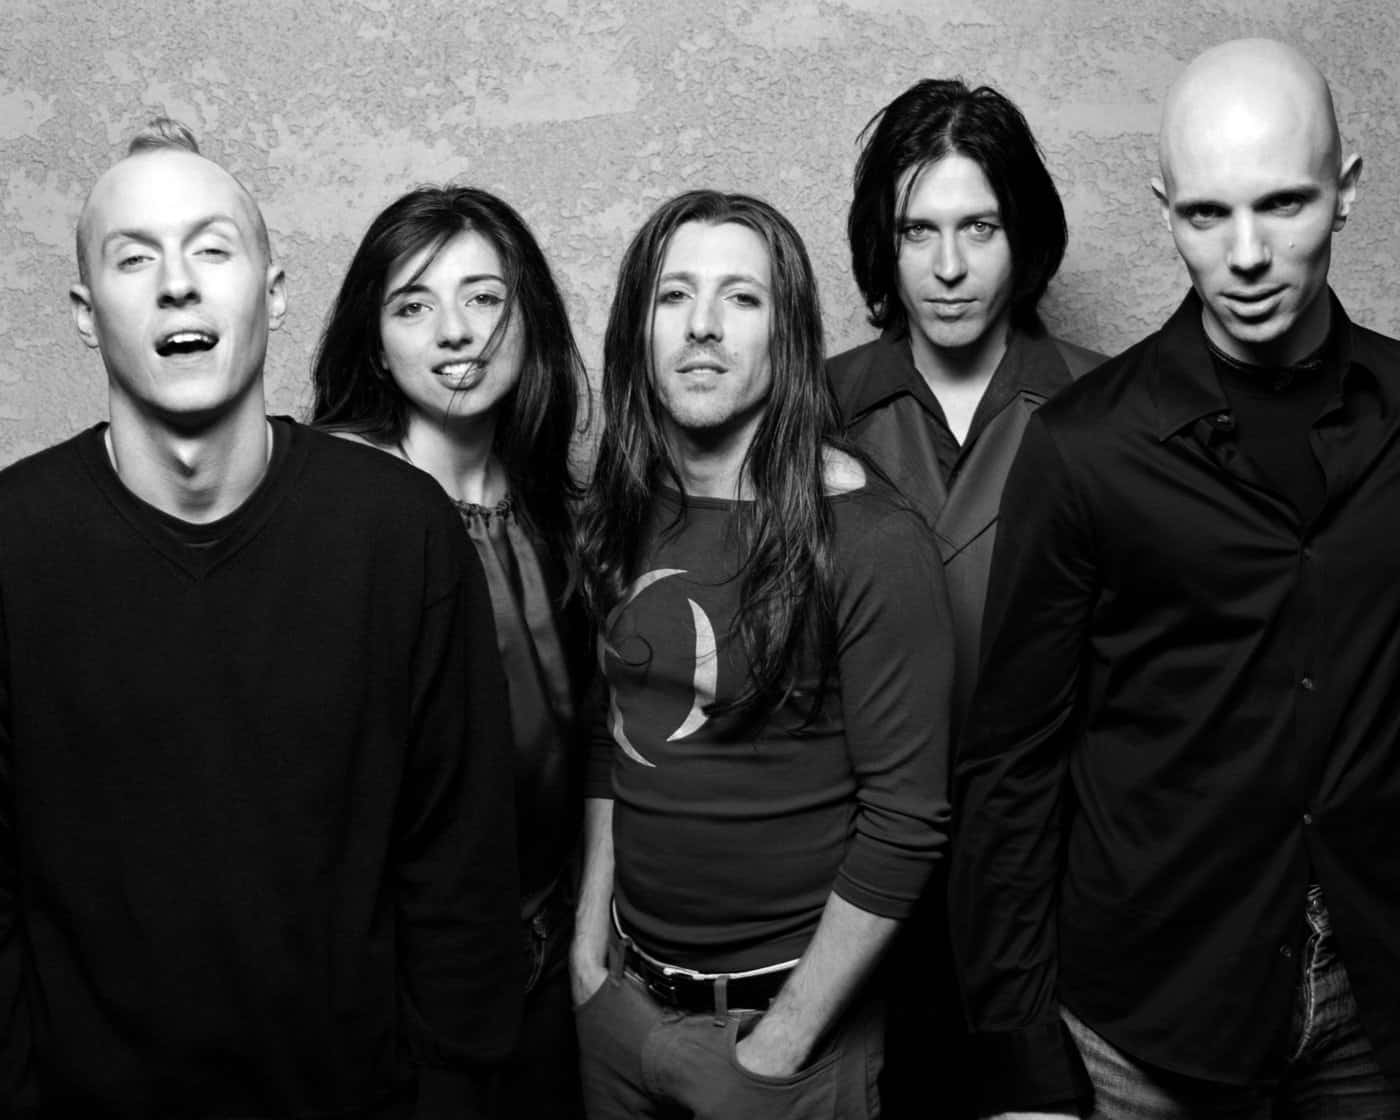 American session drummer, multi-instrumentalist, songwriter, and composer Josh Freese, with American alternative rock band A Perfect Circle. Posing for a portrait circa March, 1999 in North Hollywood, California. (Photo by Bob Berg/Getty Images)